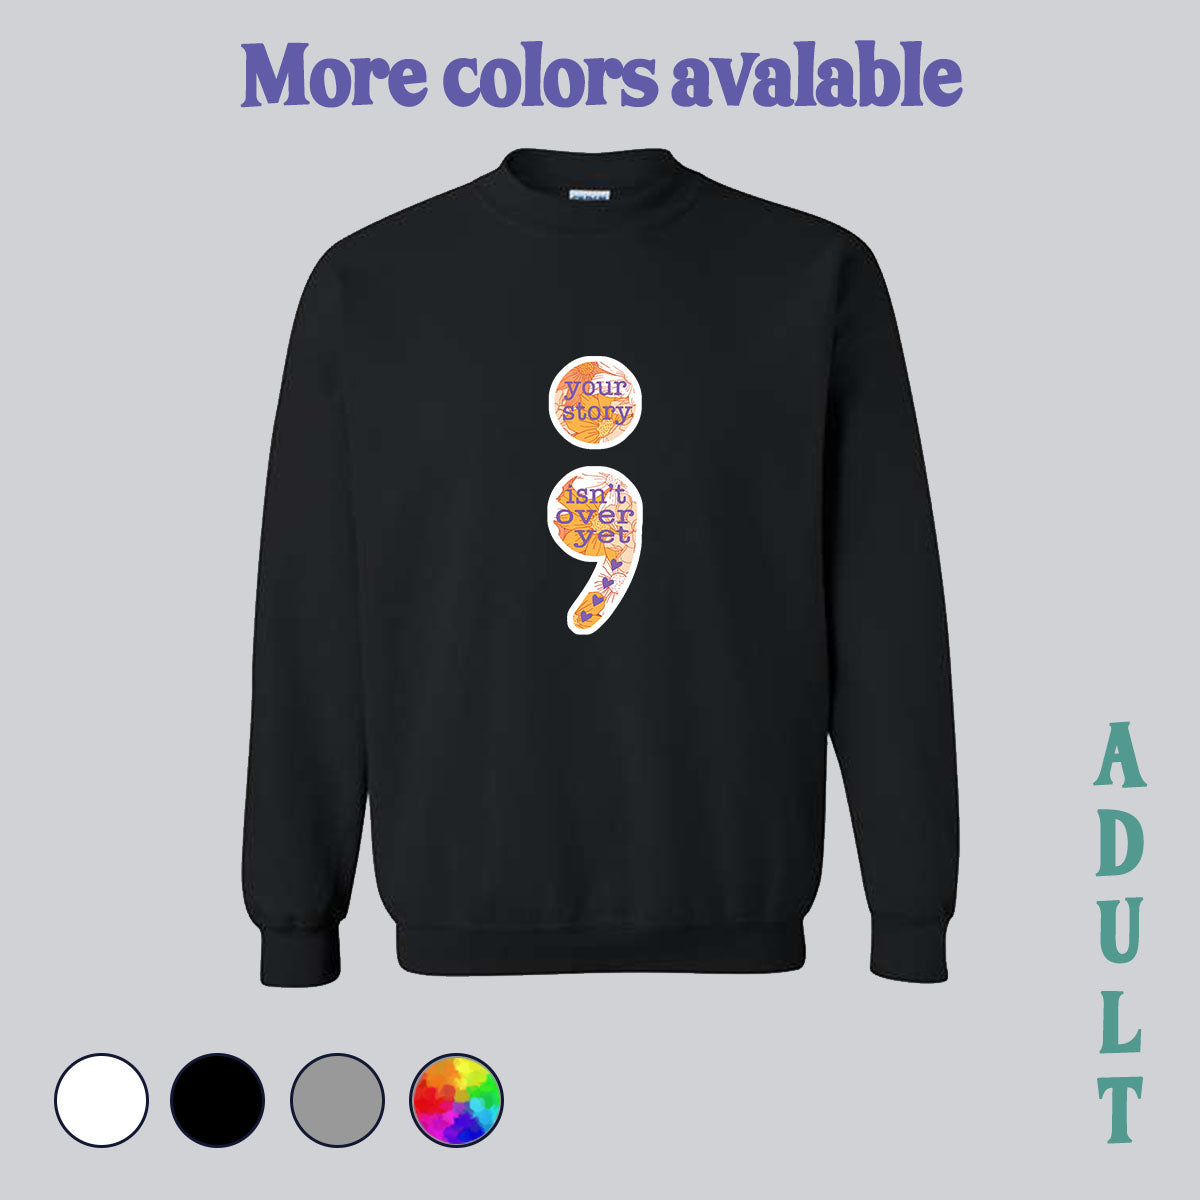 SWEATSHIRT (no pocket or hood) - your story, your story isn't over, semi colon, depression, anti depression, depression awareness, made in house, dtf, digital transfer, my art, my design